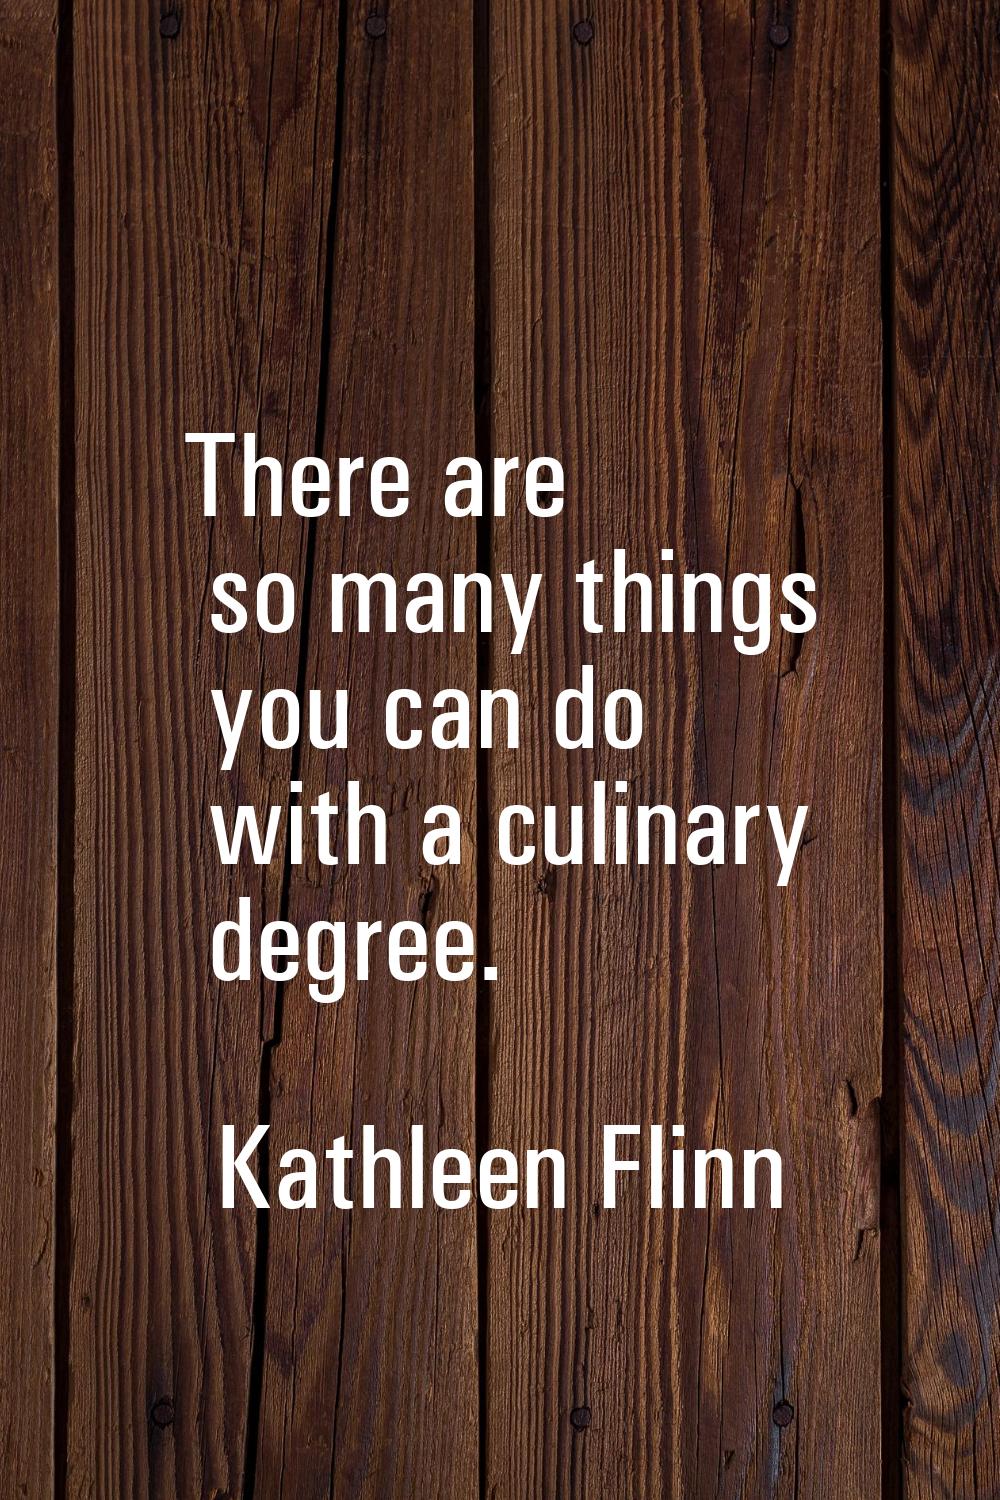 There are so many things you can do with a culinary degree.